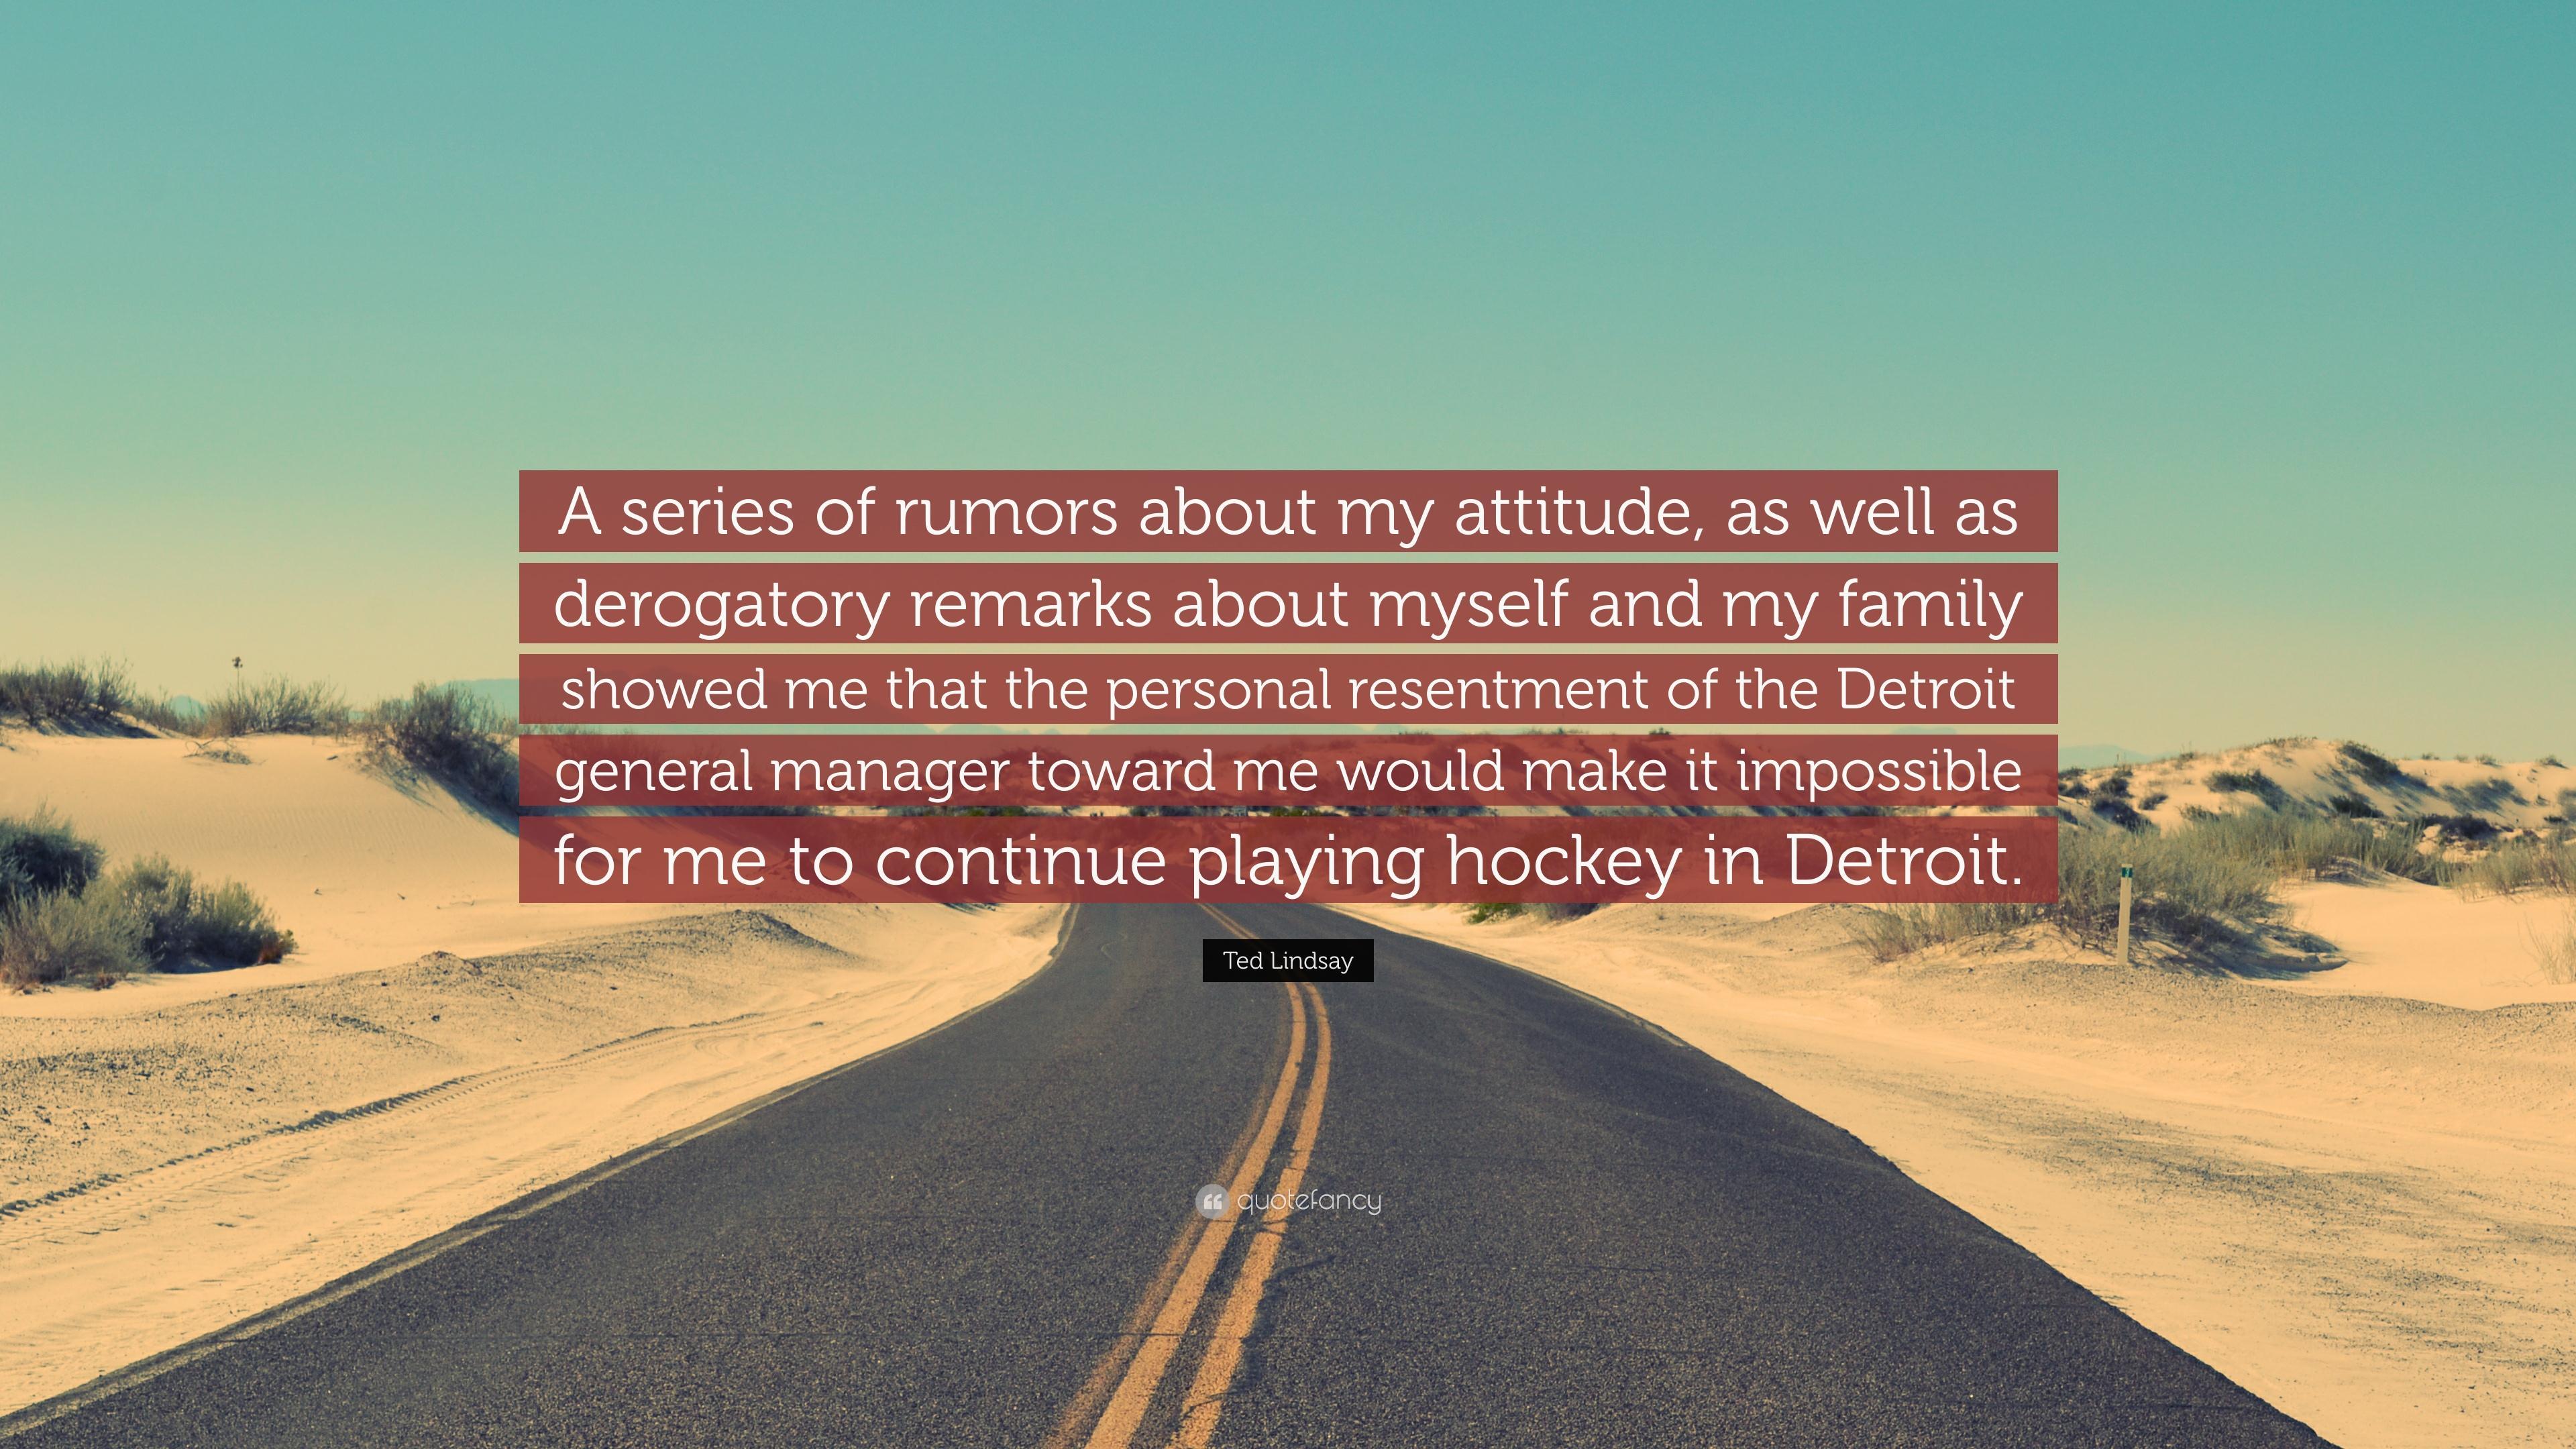 Ted Lindsay Quote: “A series of rumors about my attitude, as well as